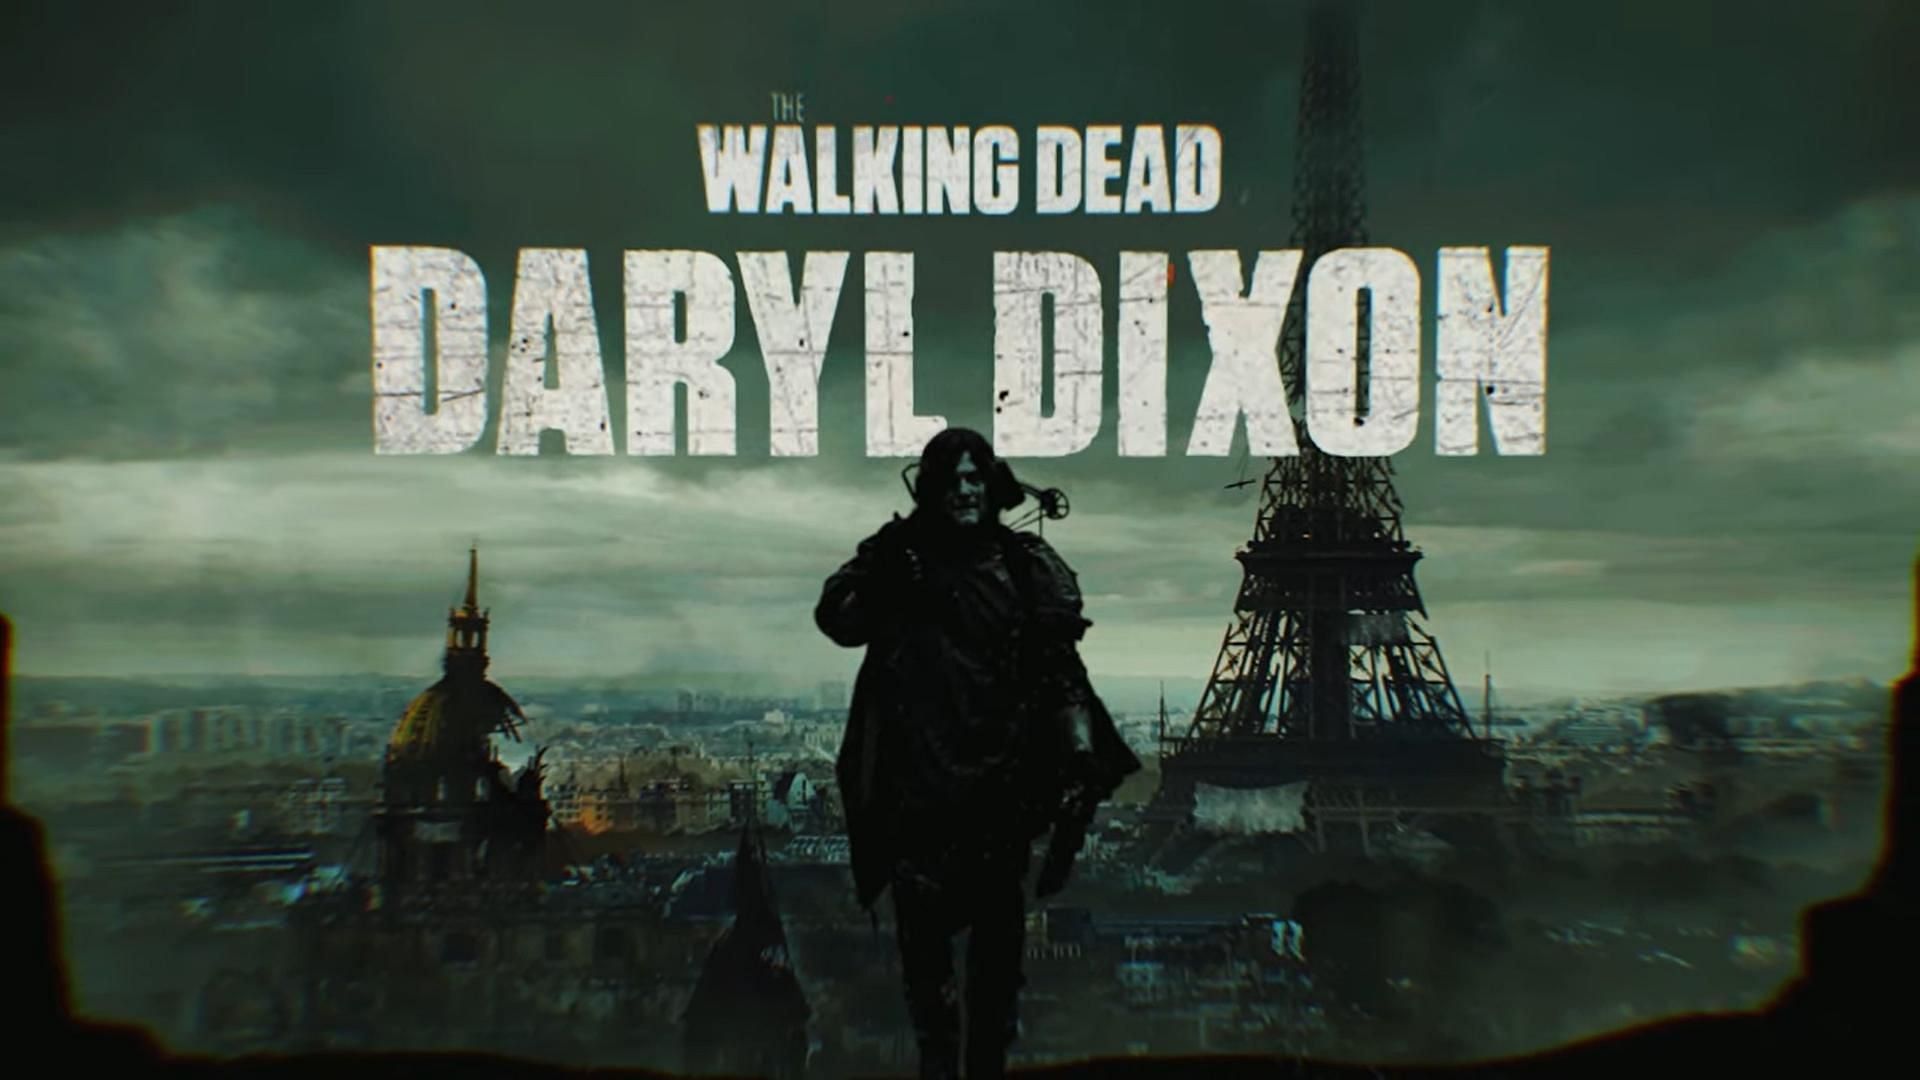 From the American South to France: Daryl Dixon&#039;s thrilling journey ahead (Image via AMC)